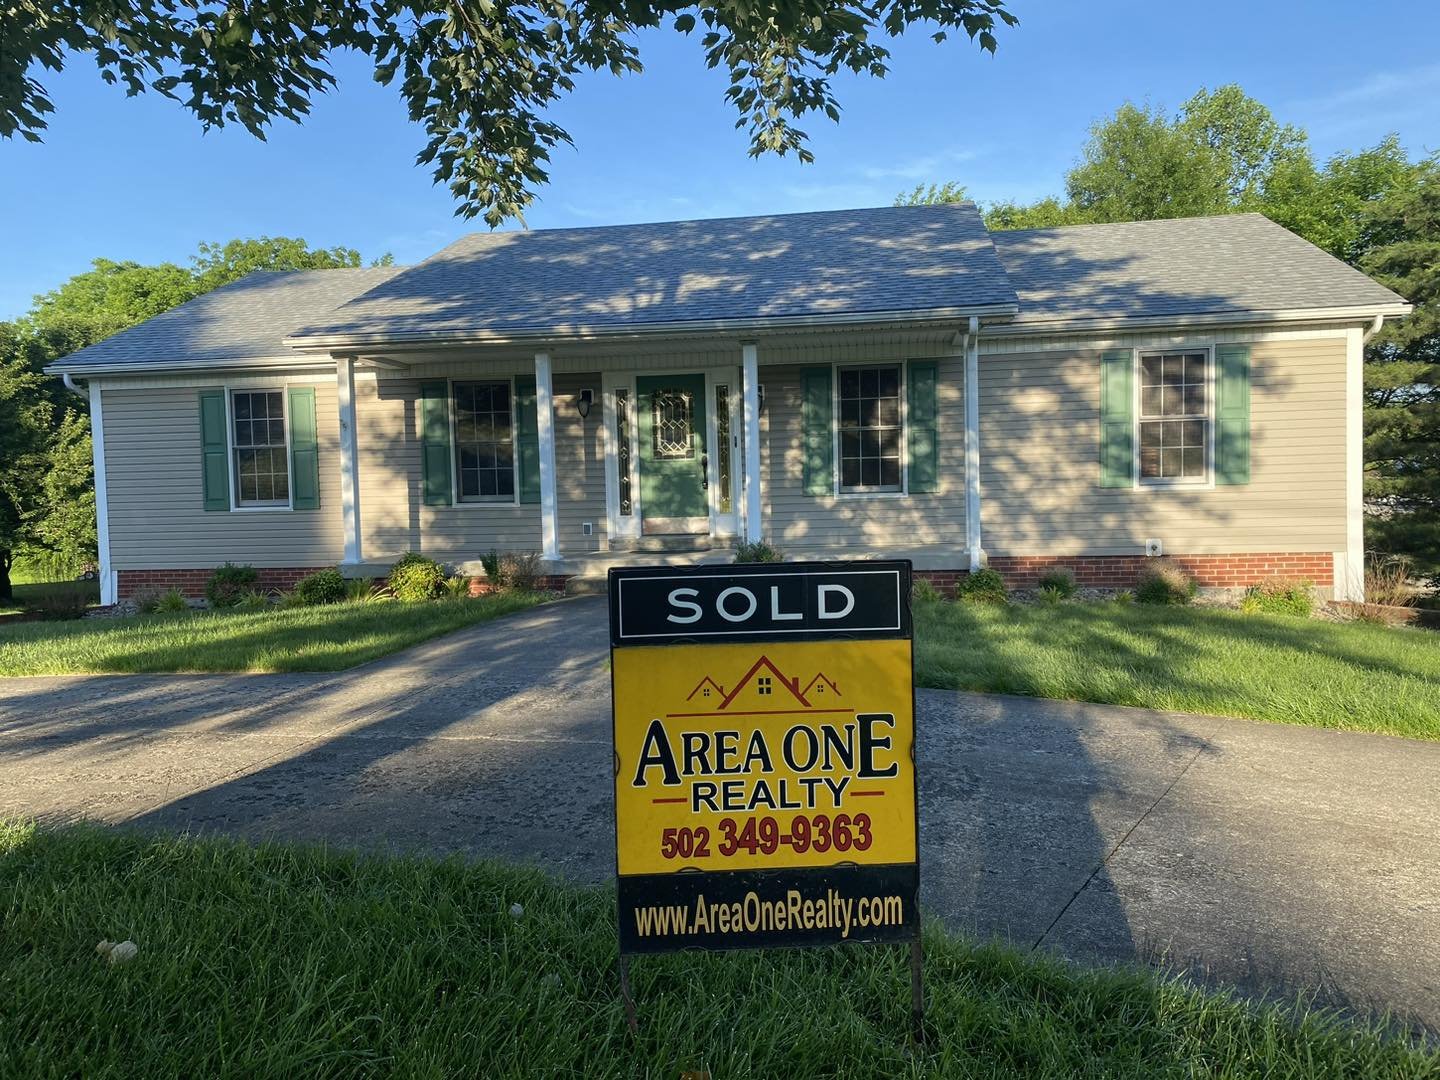 🏠🏡🏠Another GREAT home 🏡 SOLD by Mike &amp; Kathy Ballard of Area One Realty at 1000 Royal Oak Drive in historic Bardstown, Ky!🏡🏠🏡

Thank you to our wonderful Sellers who put their trust &amp; confidence in  Area One Realty to get their home 🏡